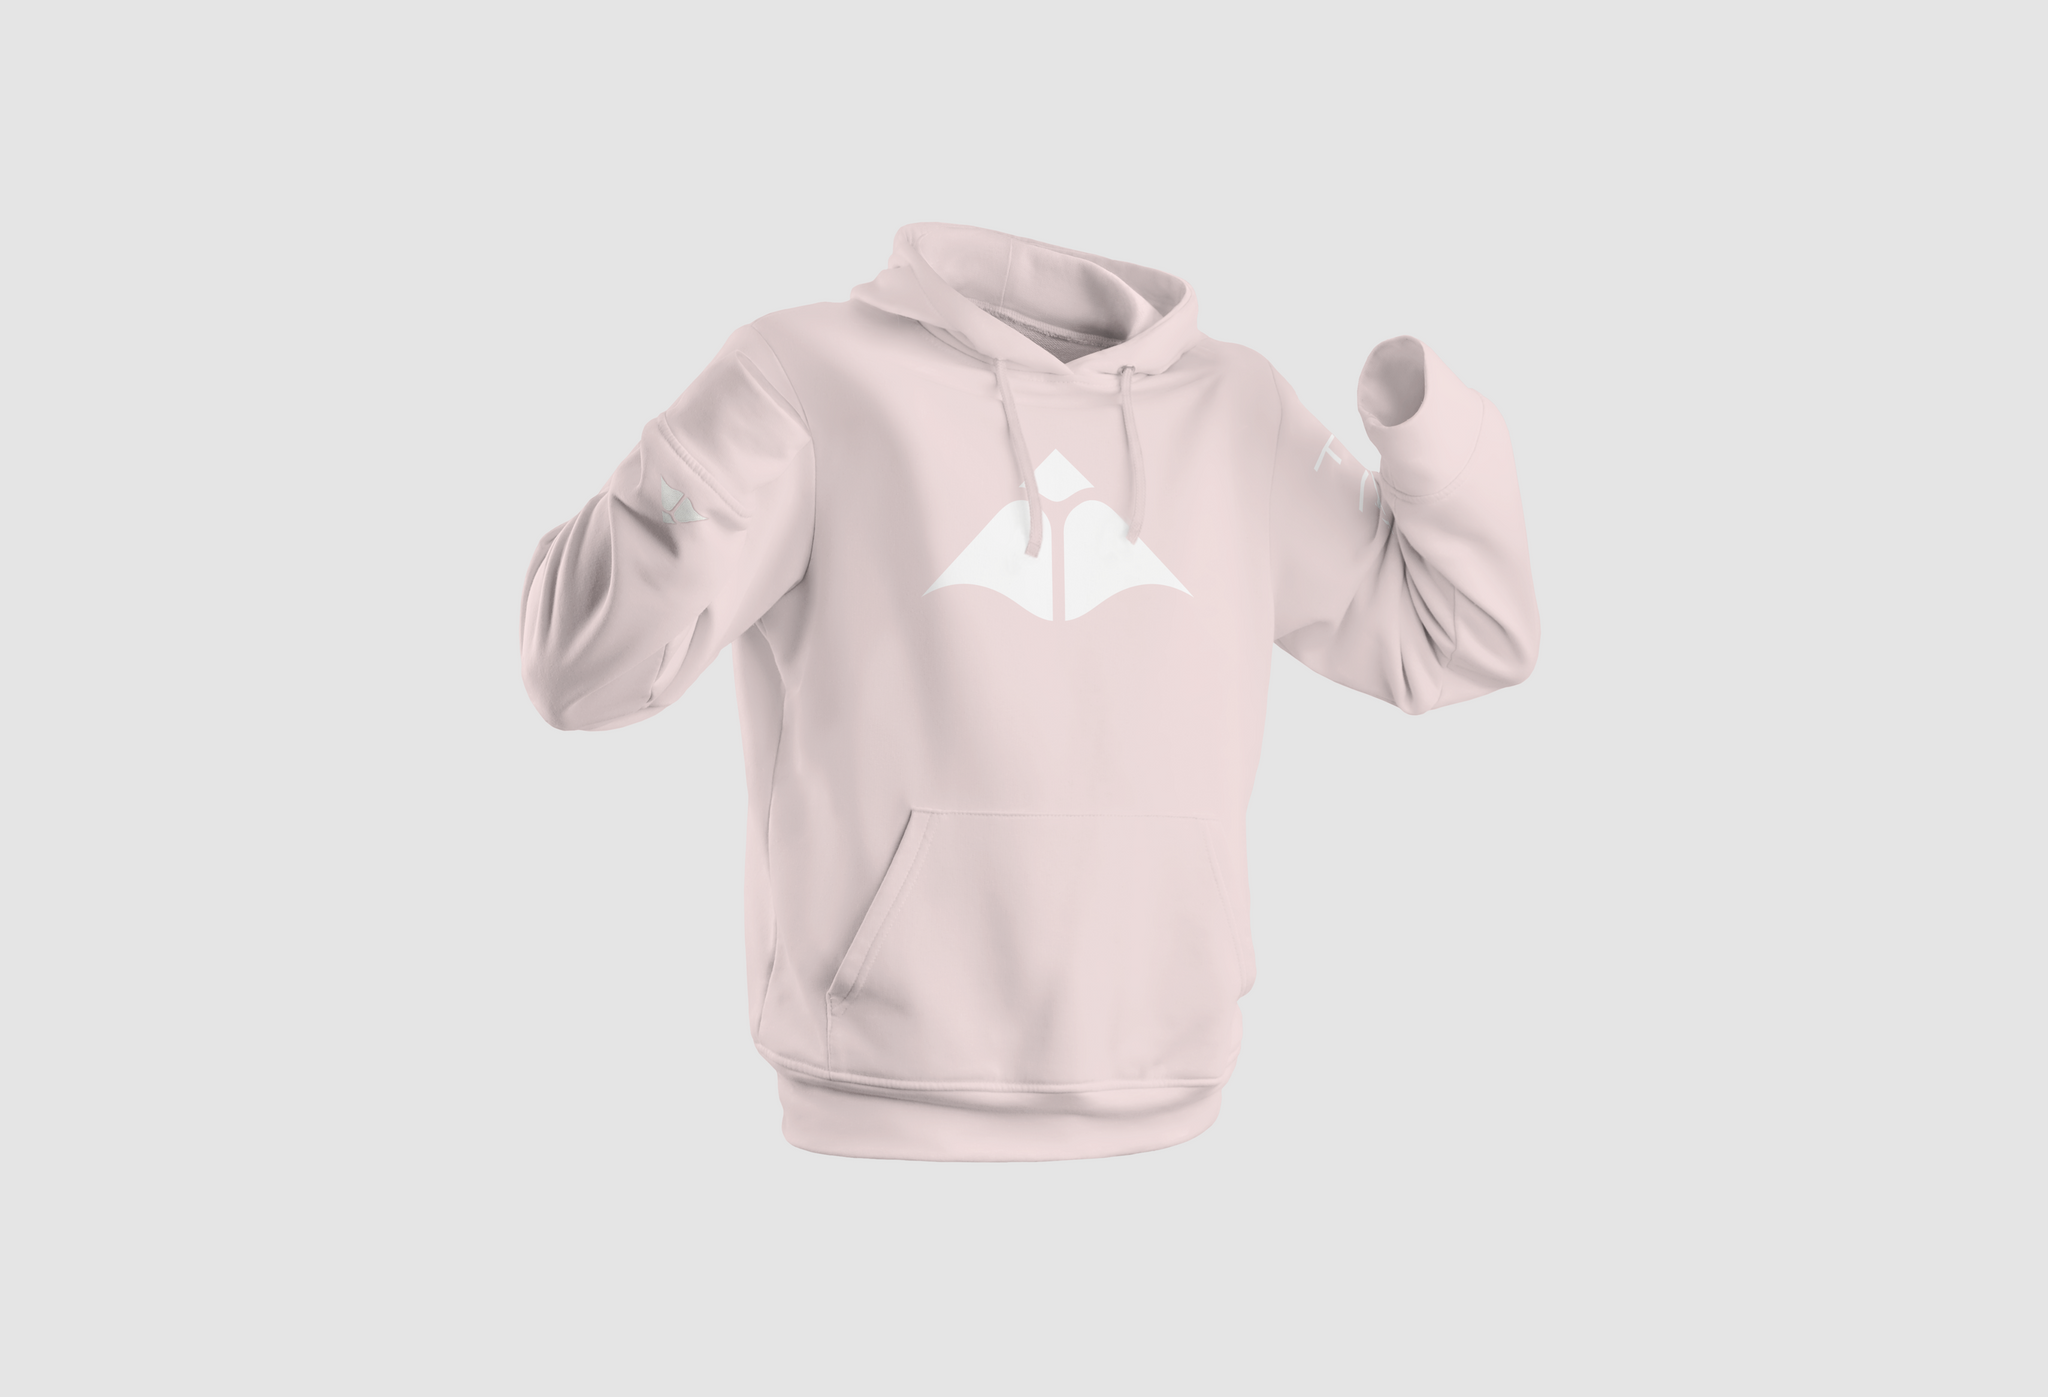 Fire Kai eco fleece pinkadilly hoodie arms in the air